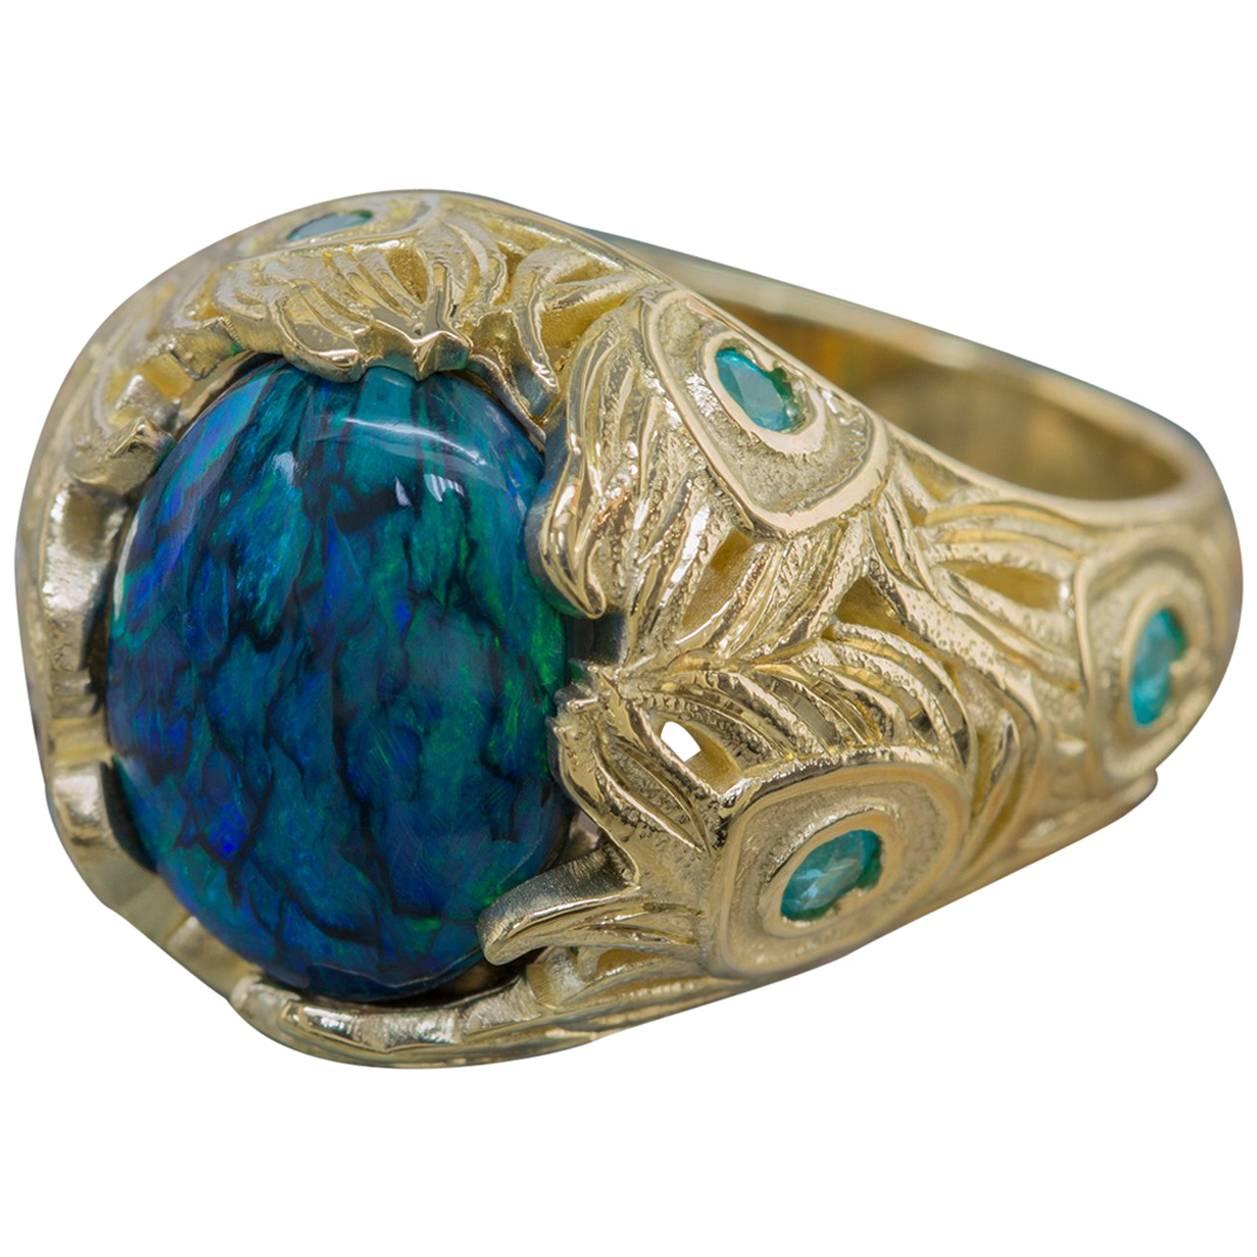 3.82 Carat Black Opal with Paraiba Tourmaline Peacock Ring in 18K Yellow Gold